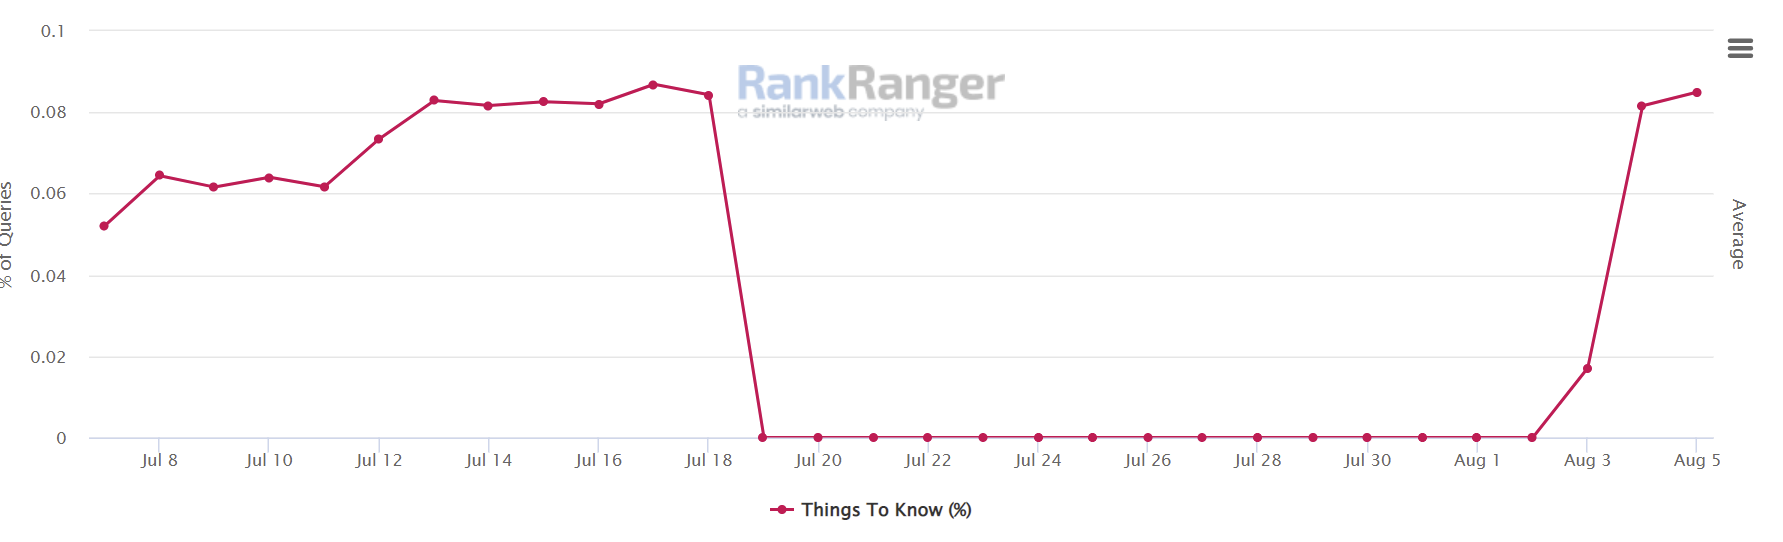 'Things to know' desktop search - Rank Ranger vom 05.08.22